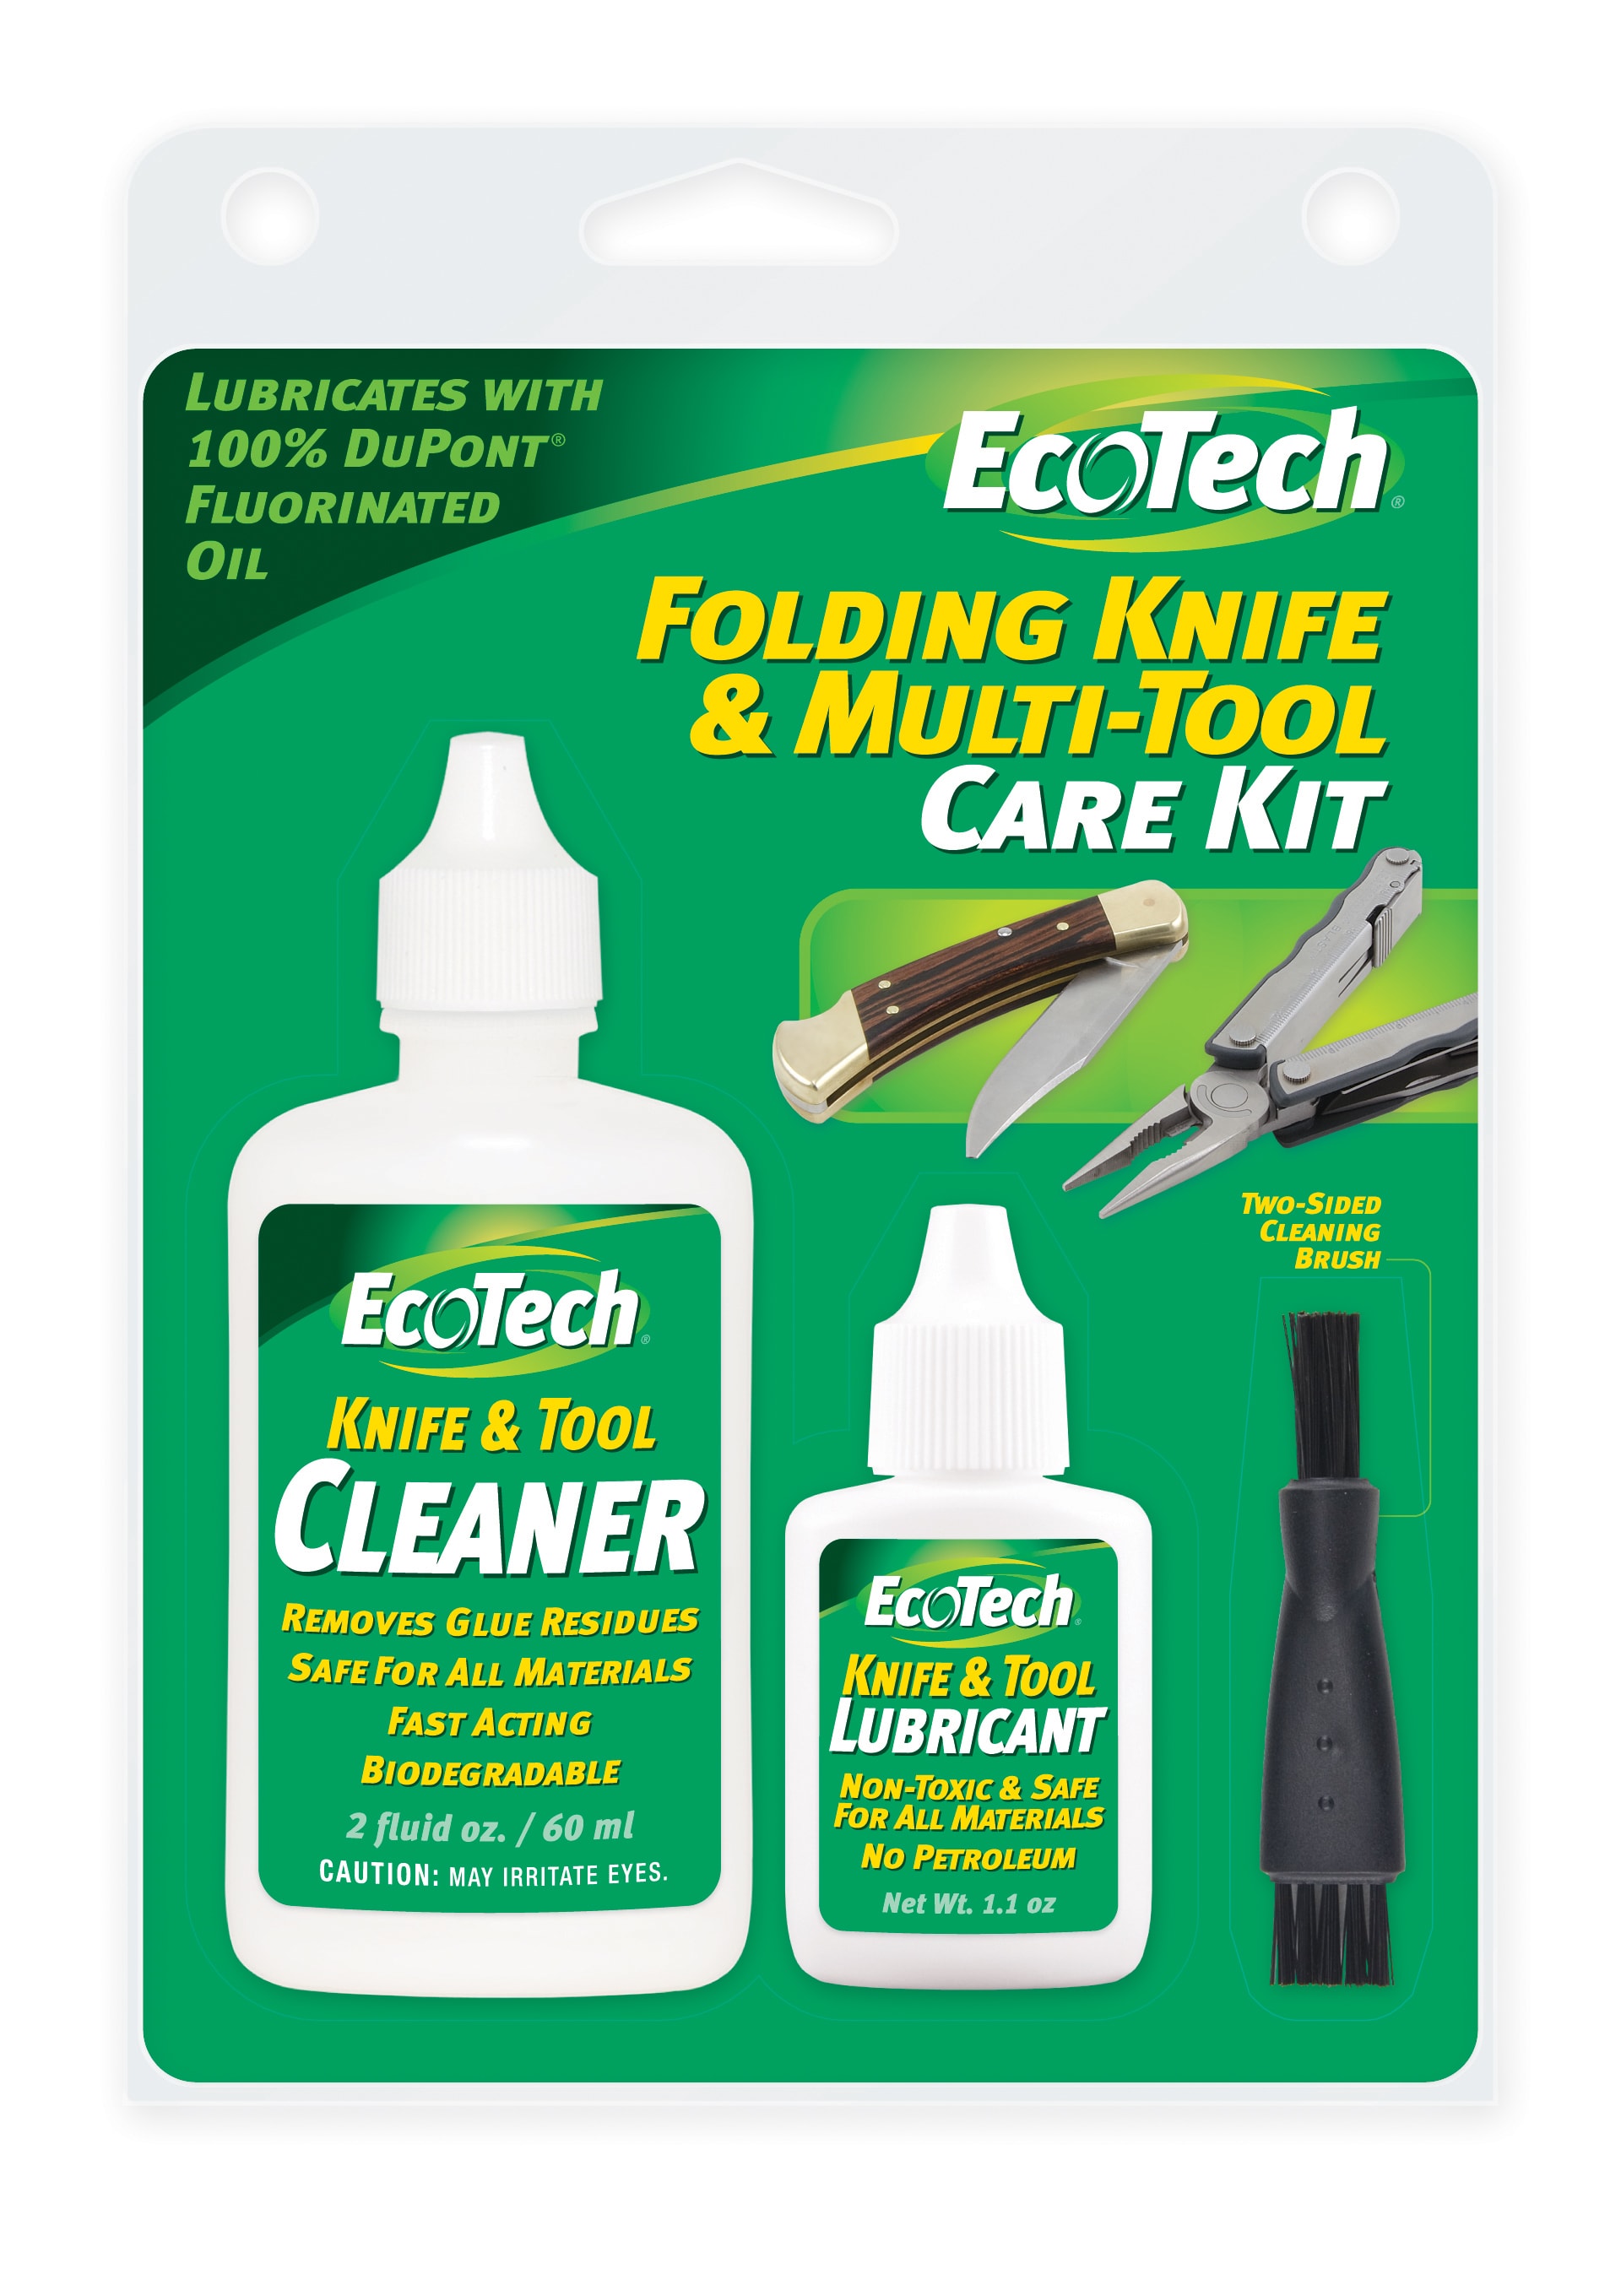 EcoTech ECOTECH Folding Knife Kit - DuPont Fluorinated Oil, Biodegradable  Degreaser, Lubricant & Cleaning Brush in the Hardware Lubricants department  at